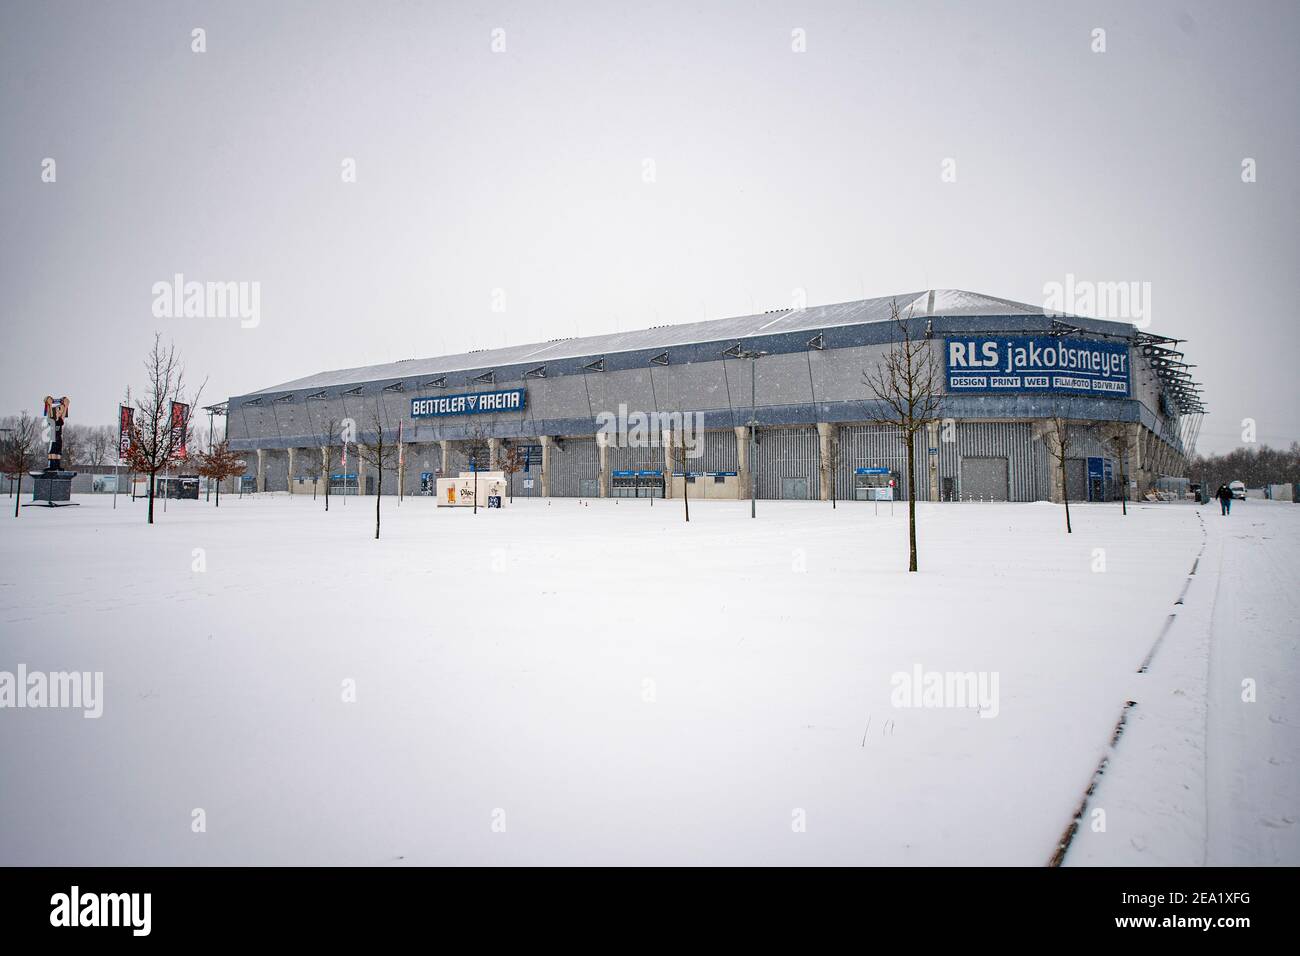 07 February 2021, North Rhine-Westphalia, Paderborn: Football: 2. Bundesliga, SC Paderborn 07 - 1. FC Heidenheim, Matchday 20, at Benteler-Arena. Exterior view of the Benteler-Arena, whose forecourt is covered with snow. Due to the heavy snowfall, the match has been cancelled shortly before kick-off. Photo: David Inderlied/dpa - IMPORTANT NOTE: In accordance with the regulations of the DFL Deutsche Fußball Liga and/or the DFB Deutscher Fußball-Bund, it is prohibited to use or have used photographs taken in the stadium and/or of the match in the form of sequence pictures and/or video-like photo Stock Photo